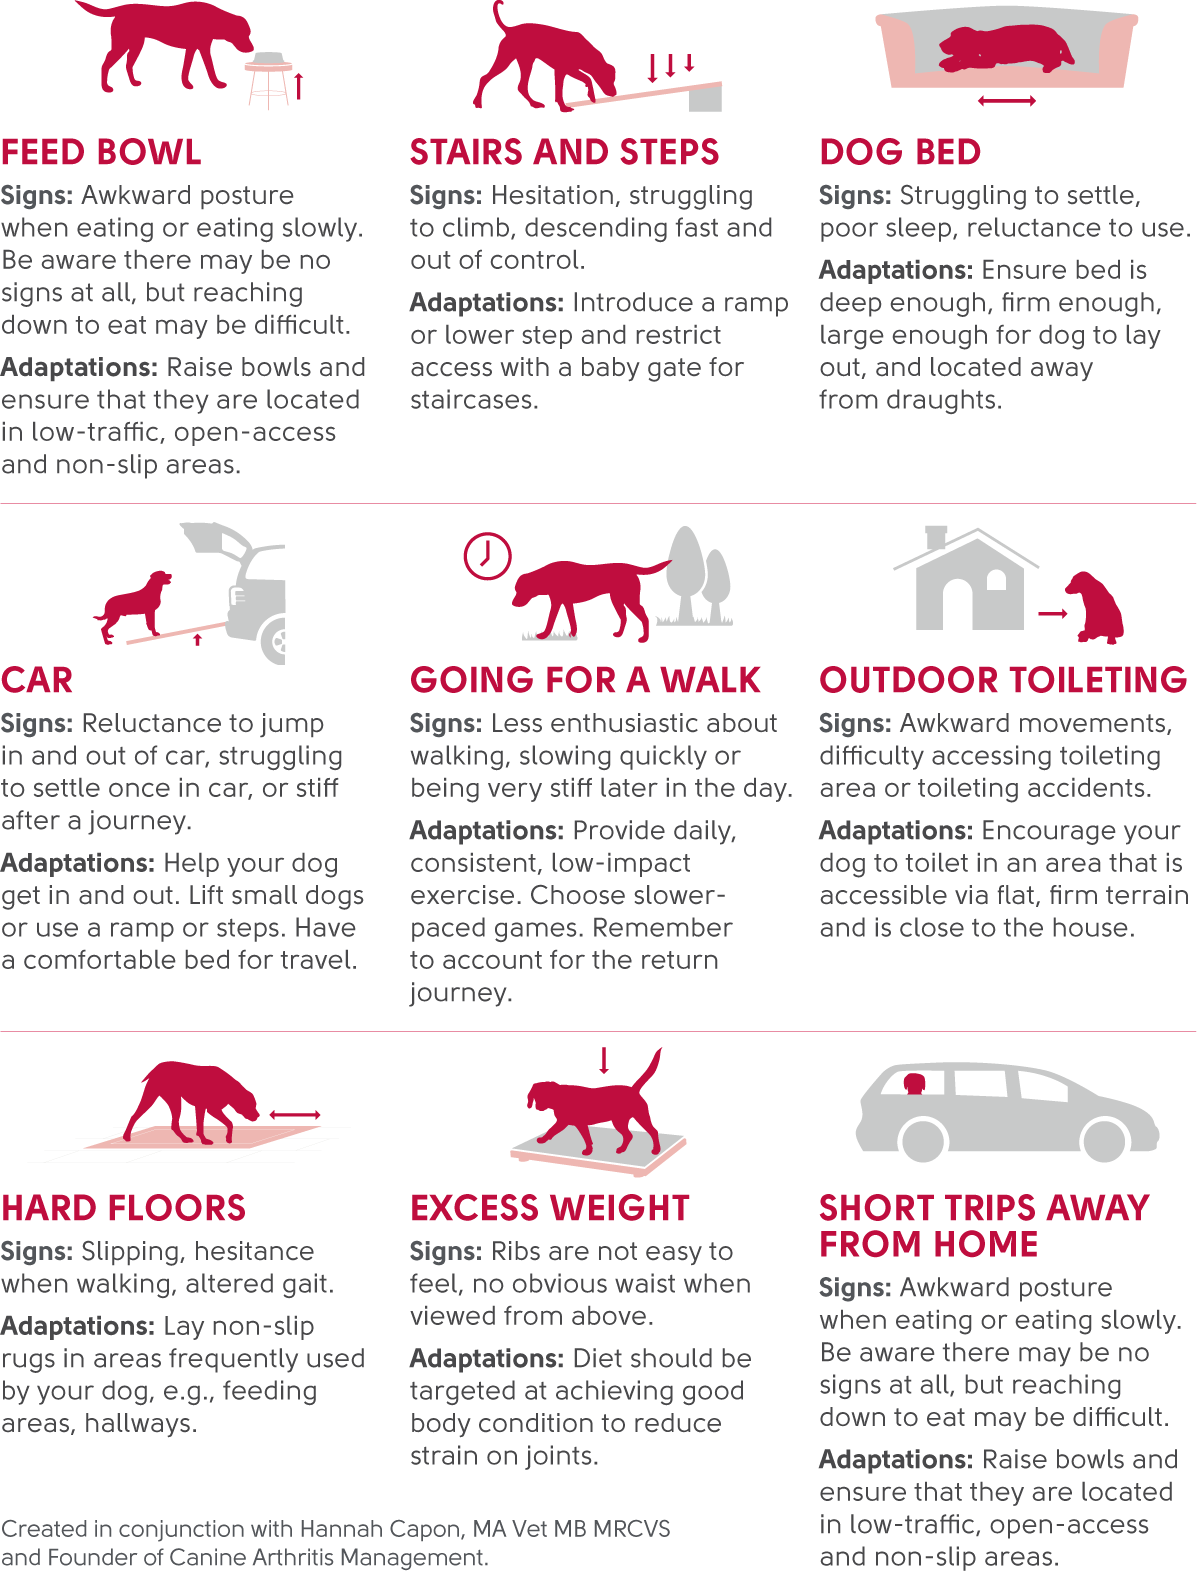 Beneficial changes to make to help dogs with OA